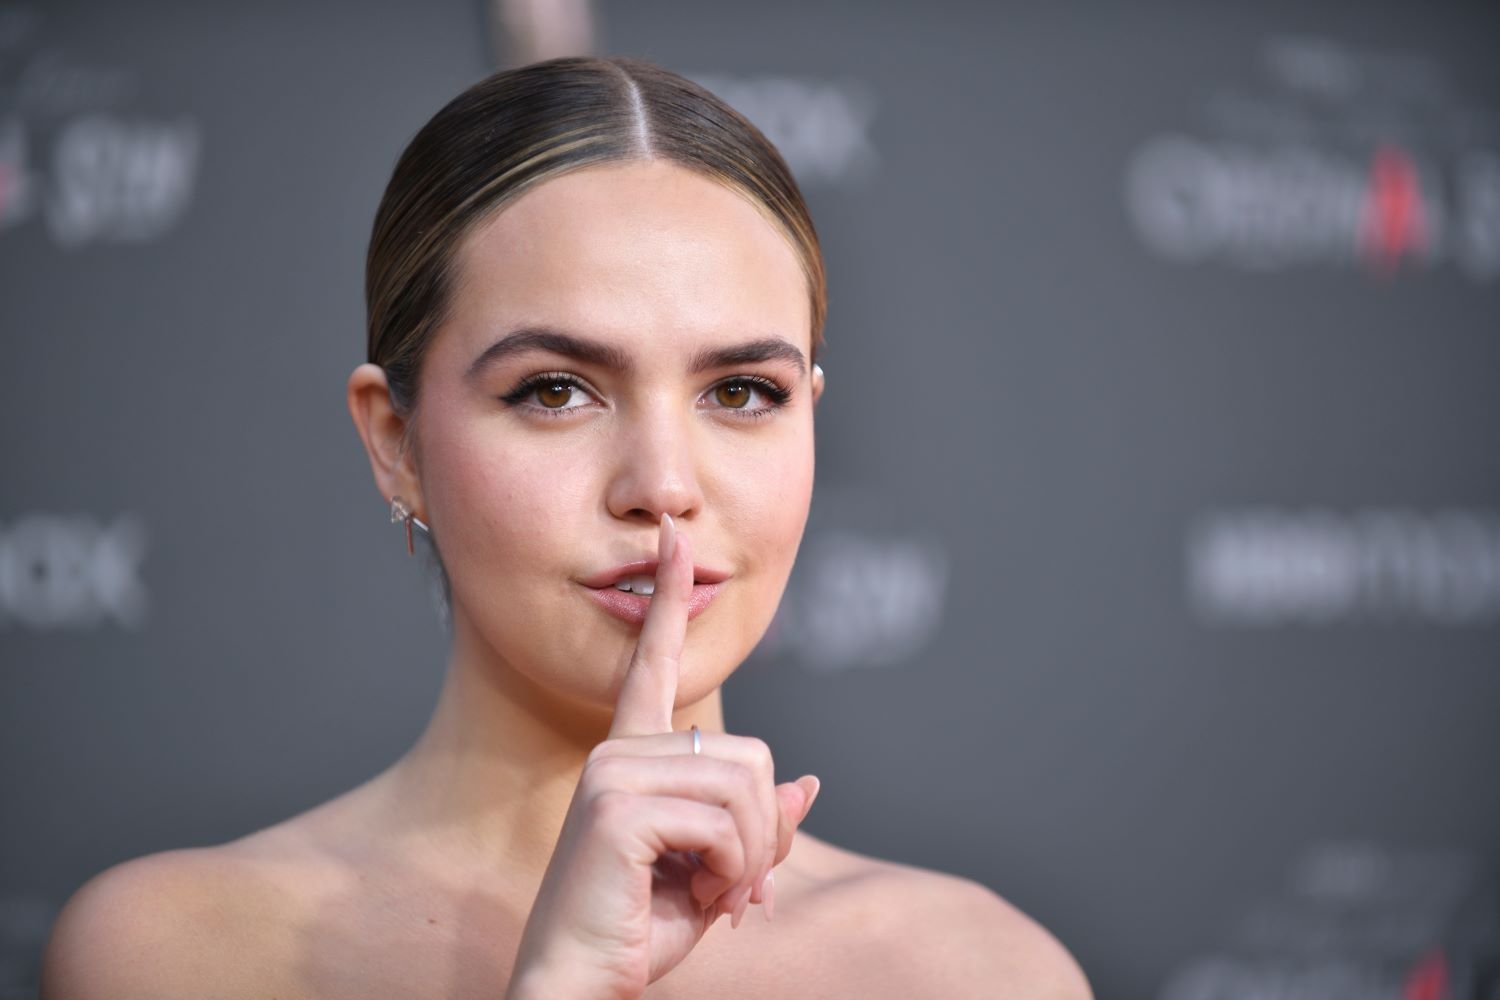 'The Good Witch' star Bailee Madison